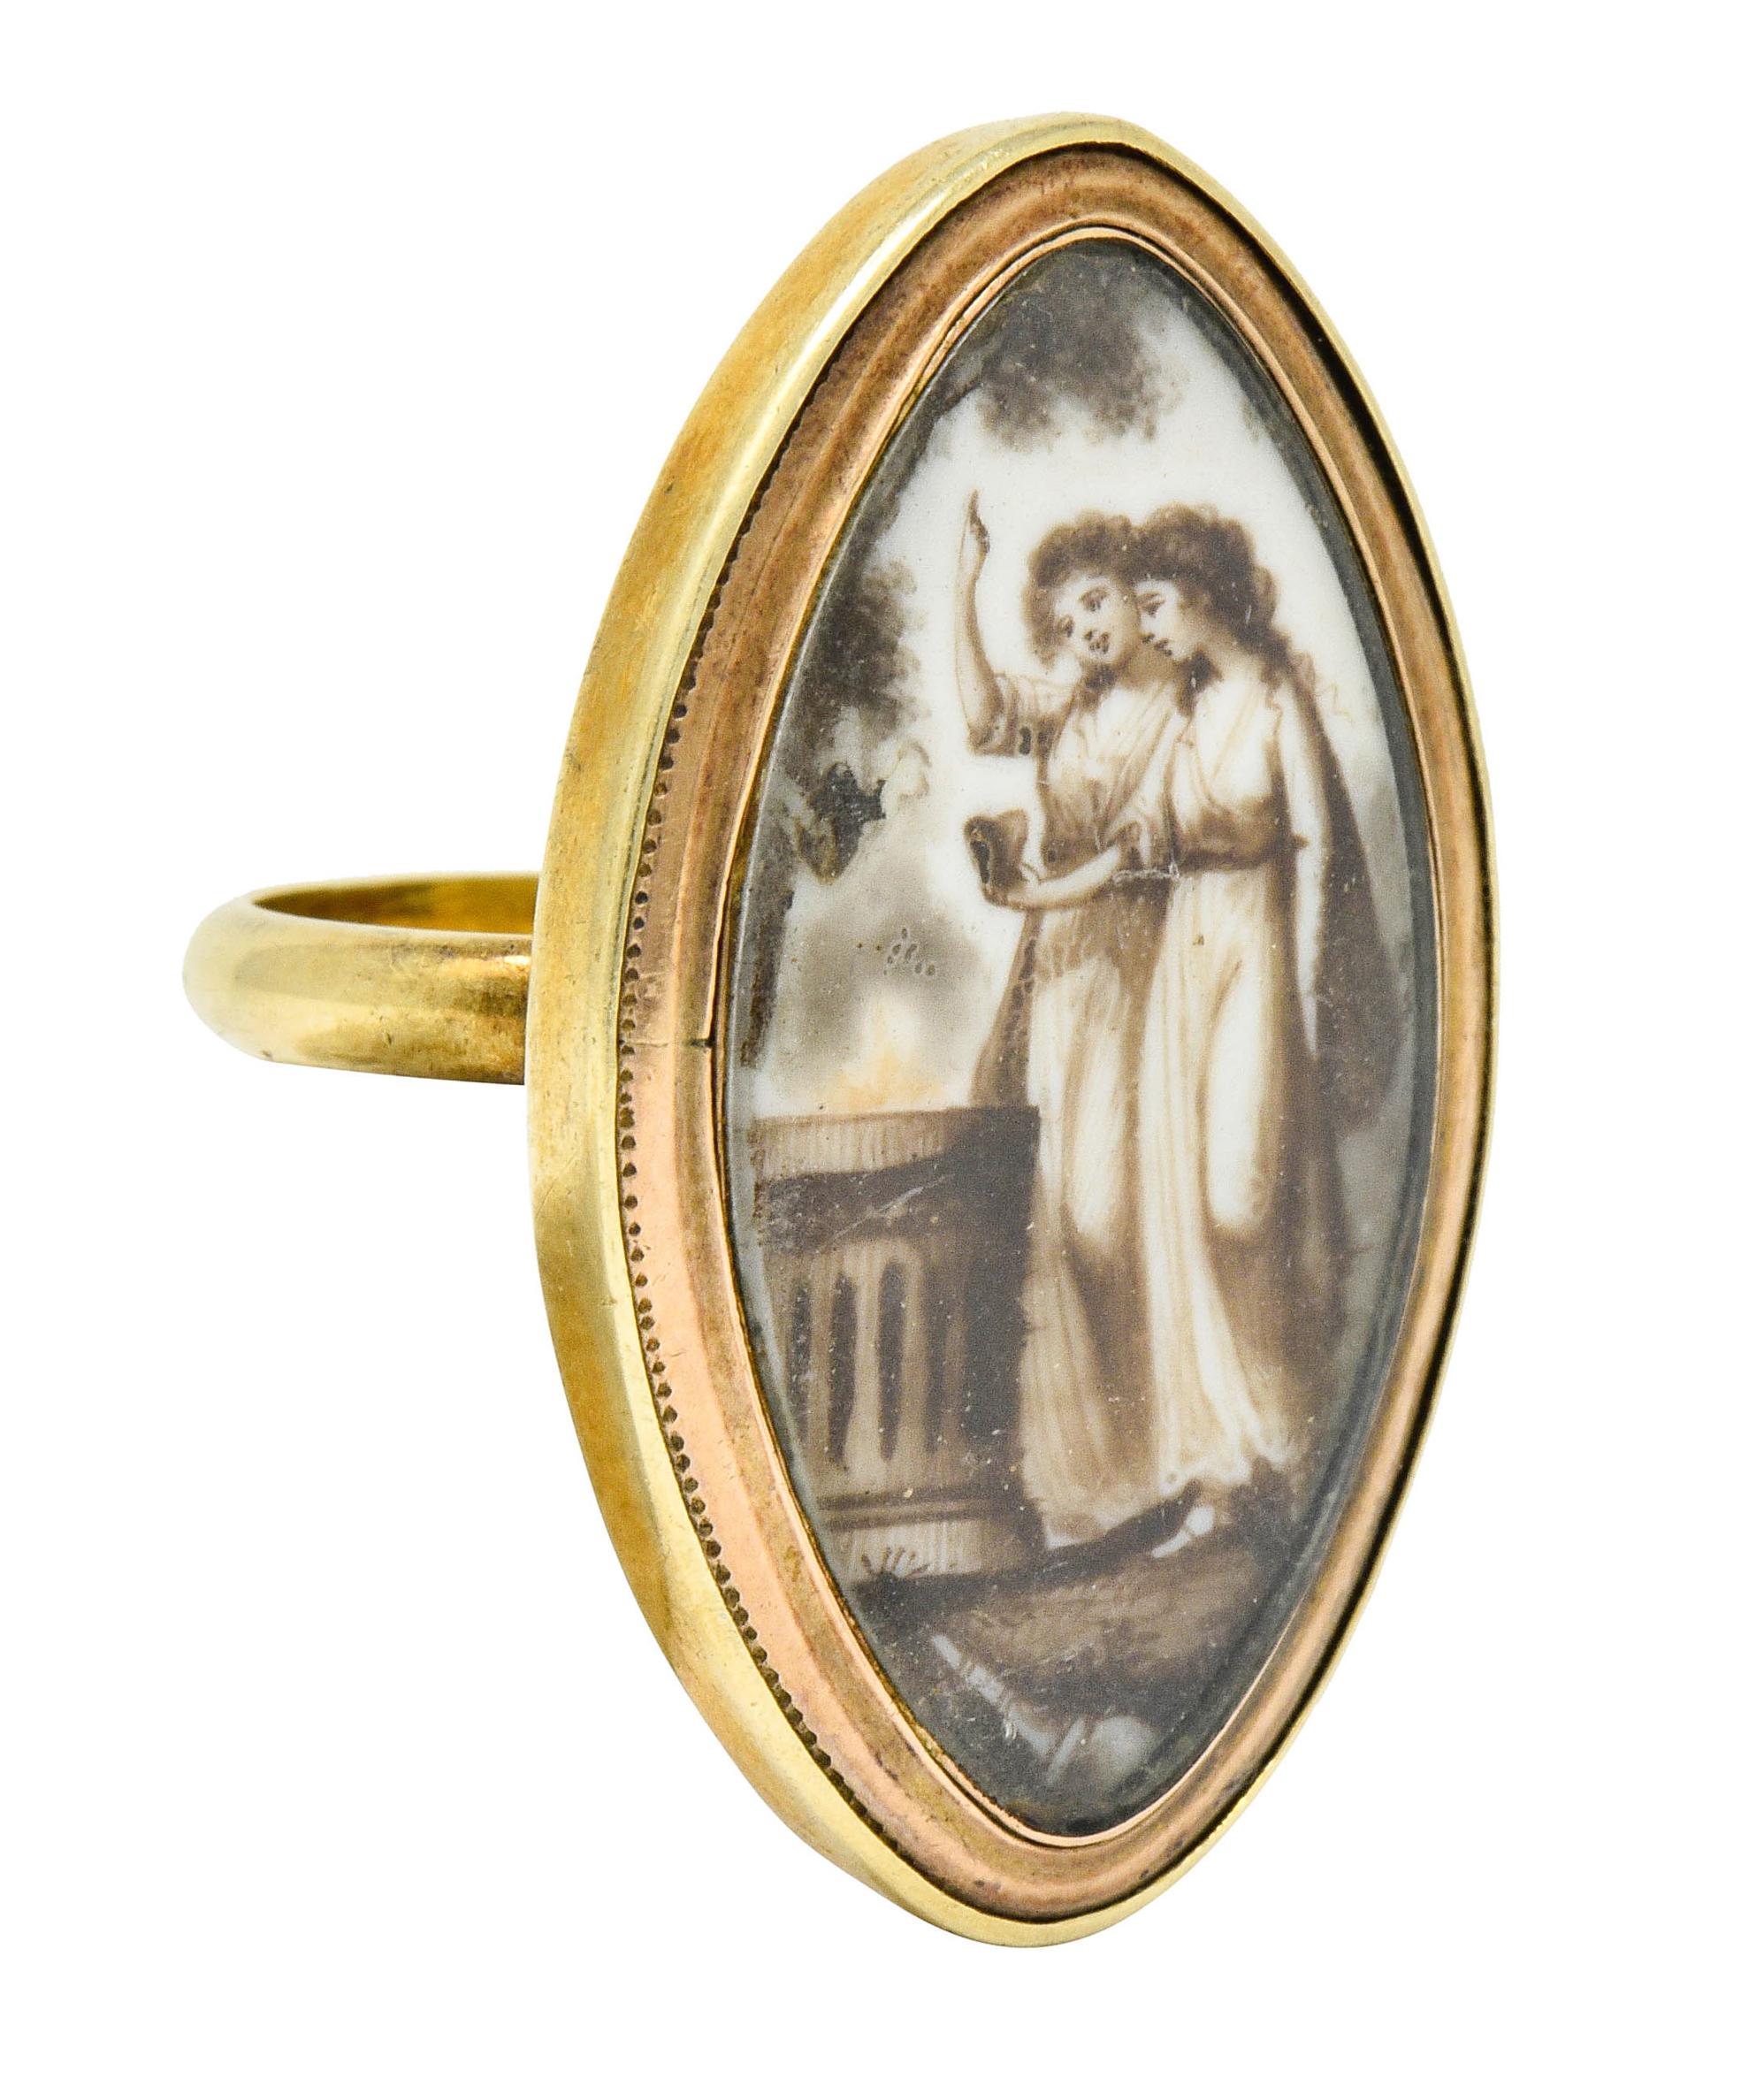 Mourning style ring centering a glass covered illustrated scene

White enamel is sepia painted to depict two women lighting a fire upon a classical doric column, outdoors with intricately rendered foliate

Bezel set in a navette shaped